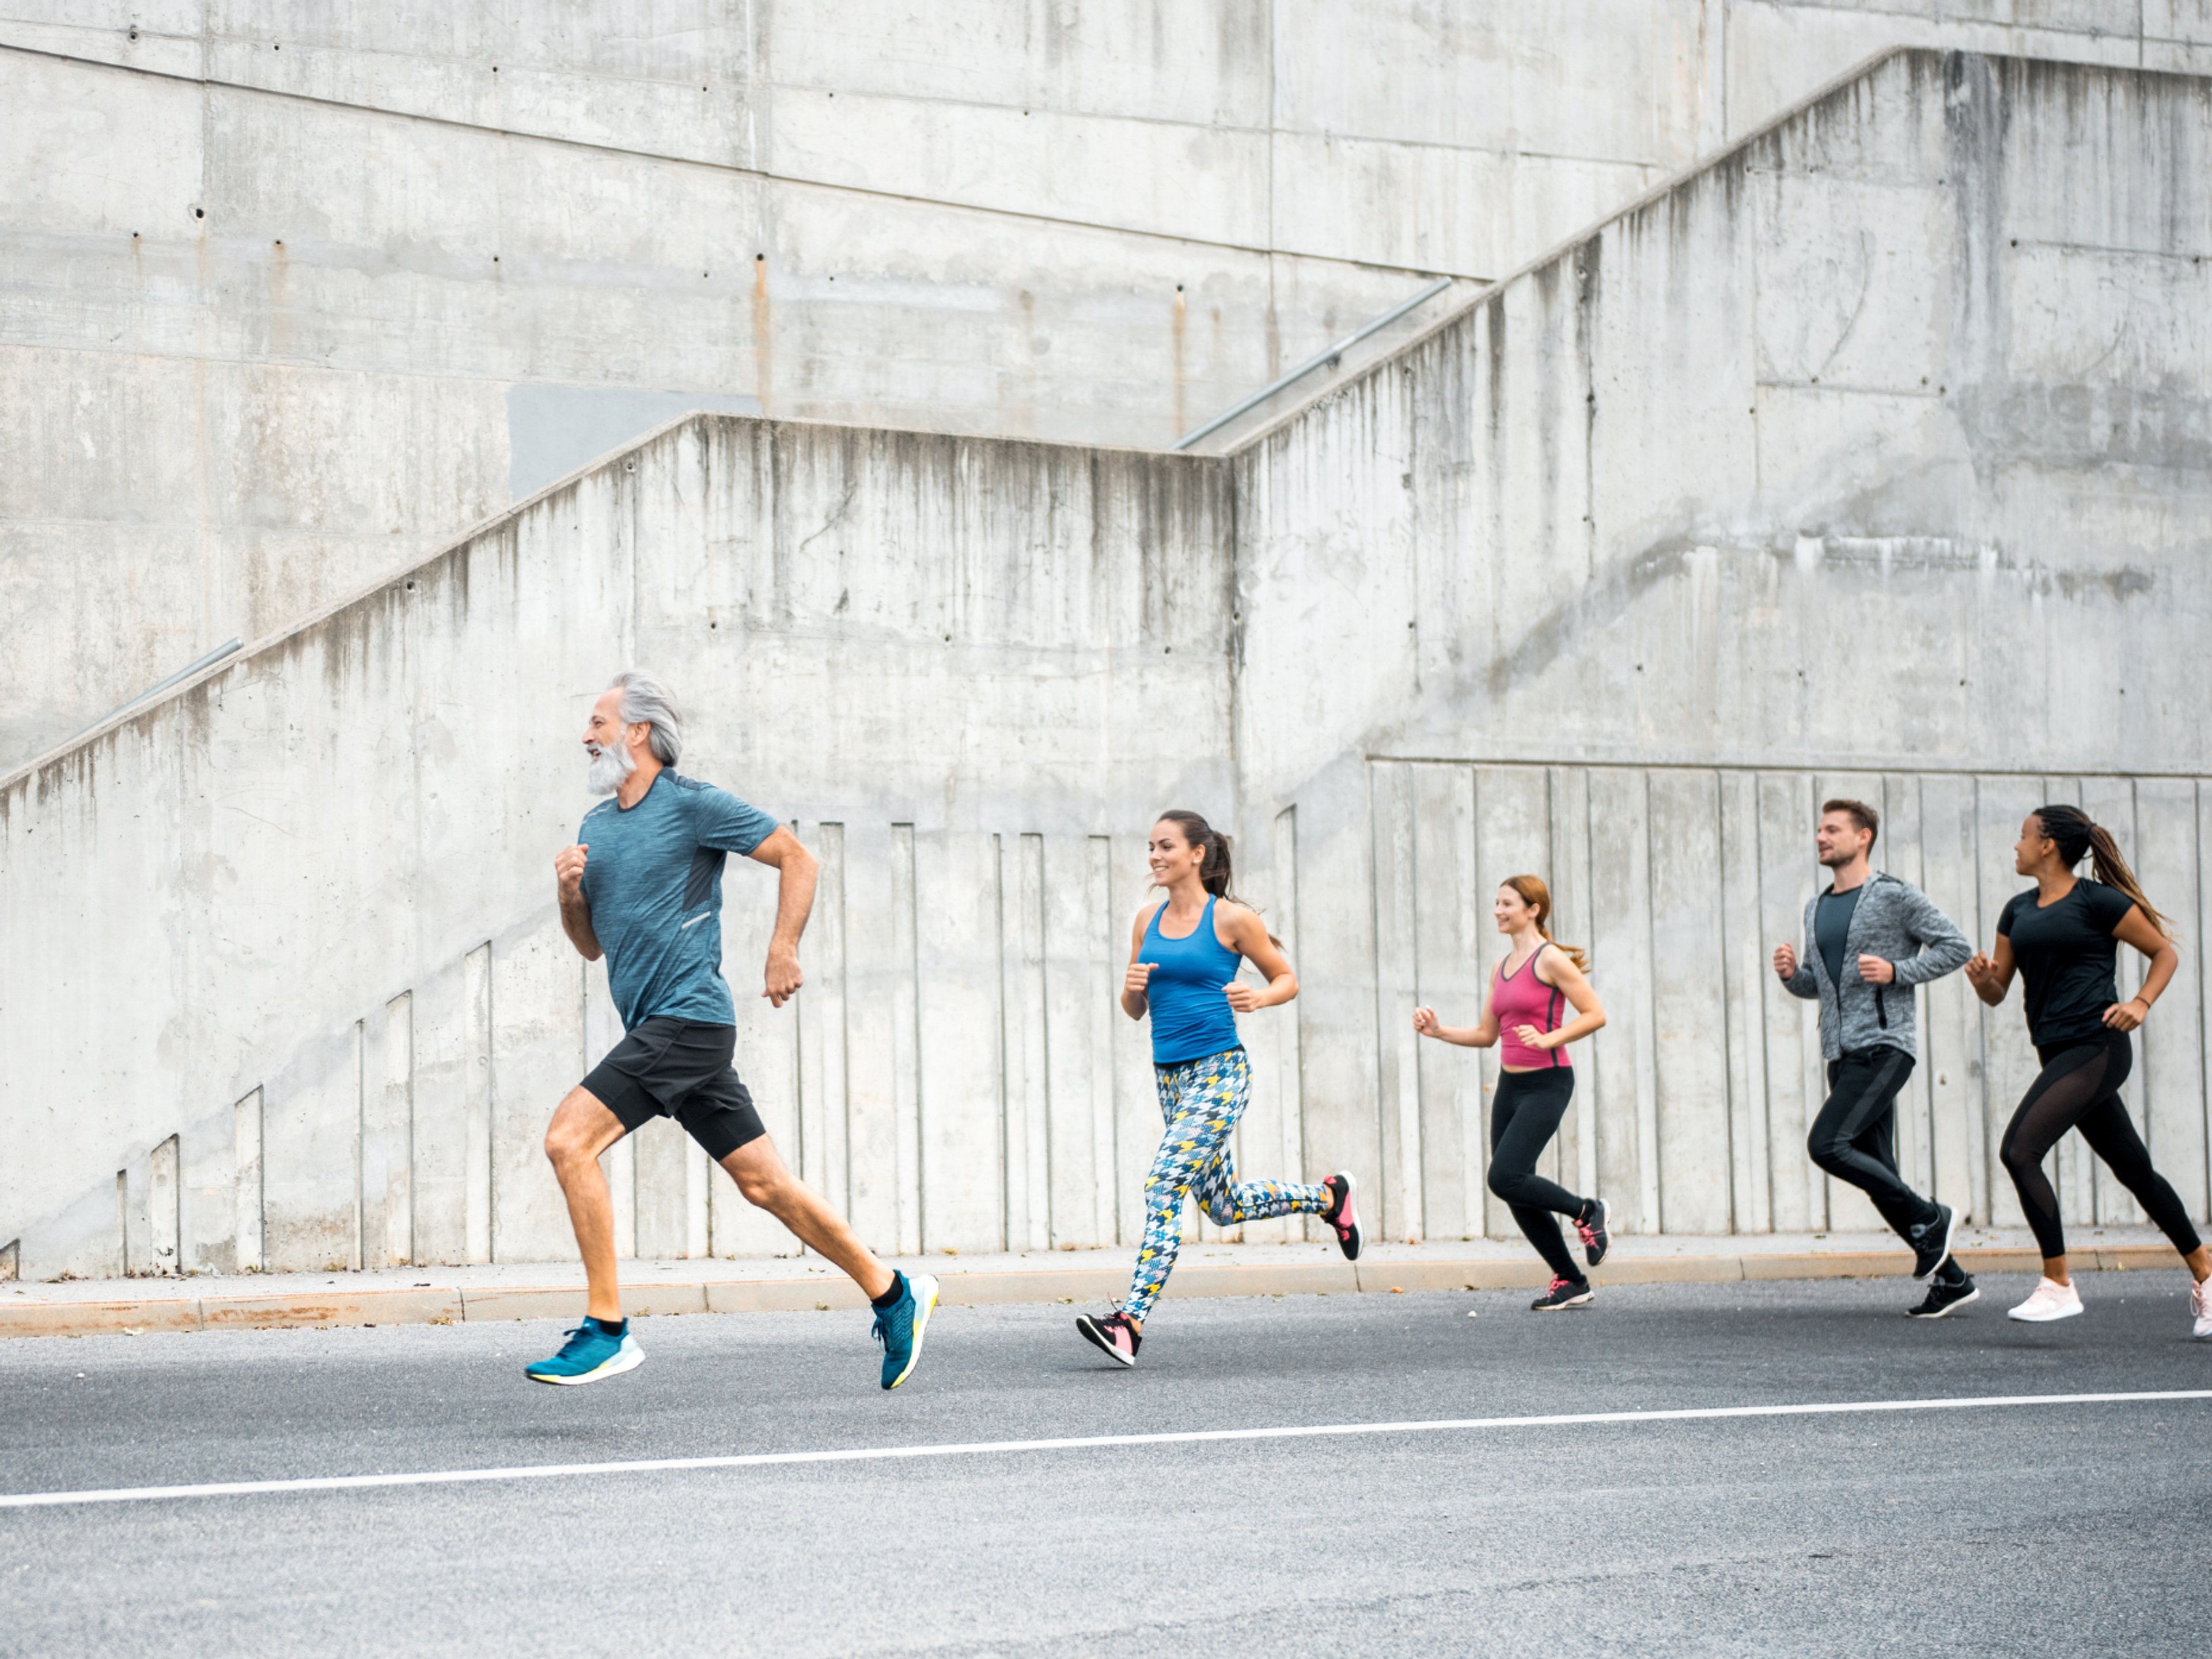 Learn what causes running overuse injuries, what warning signs to look out for and find examples of overuse injuries in runners.